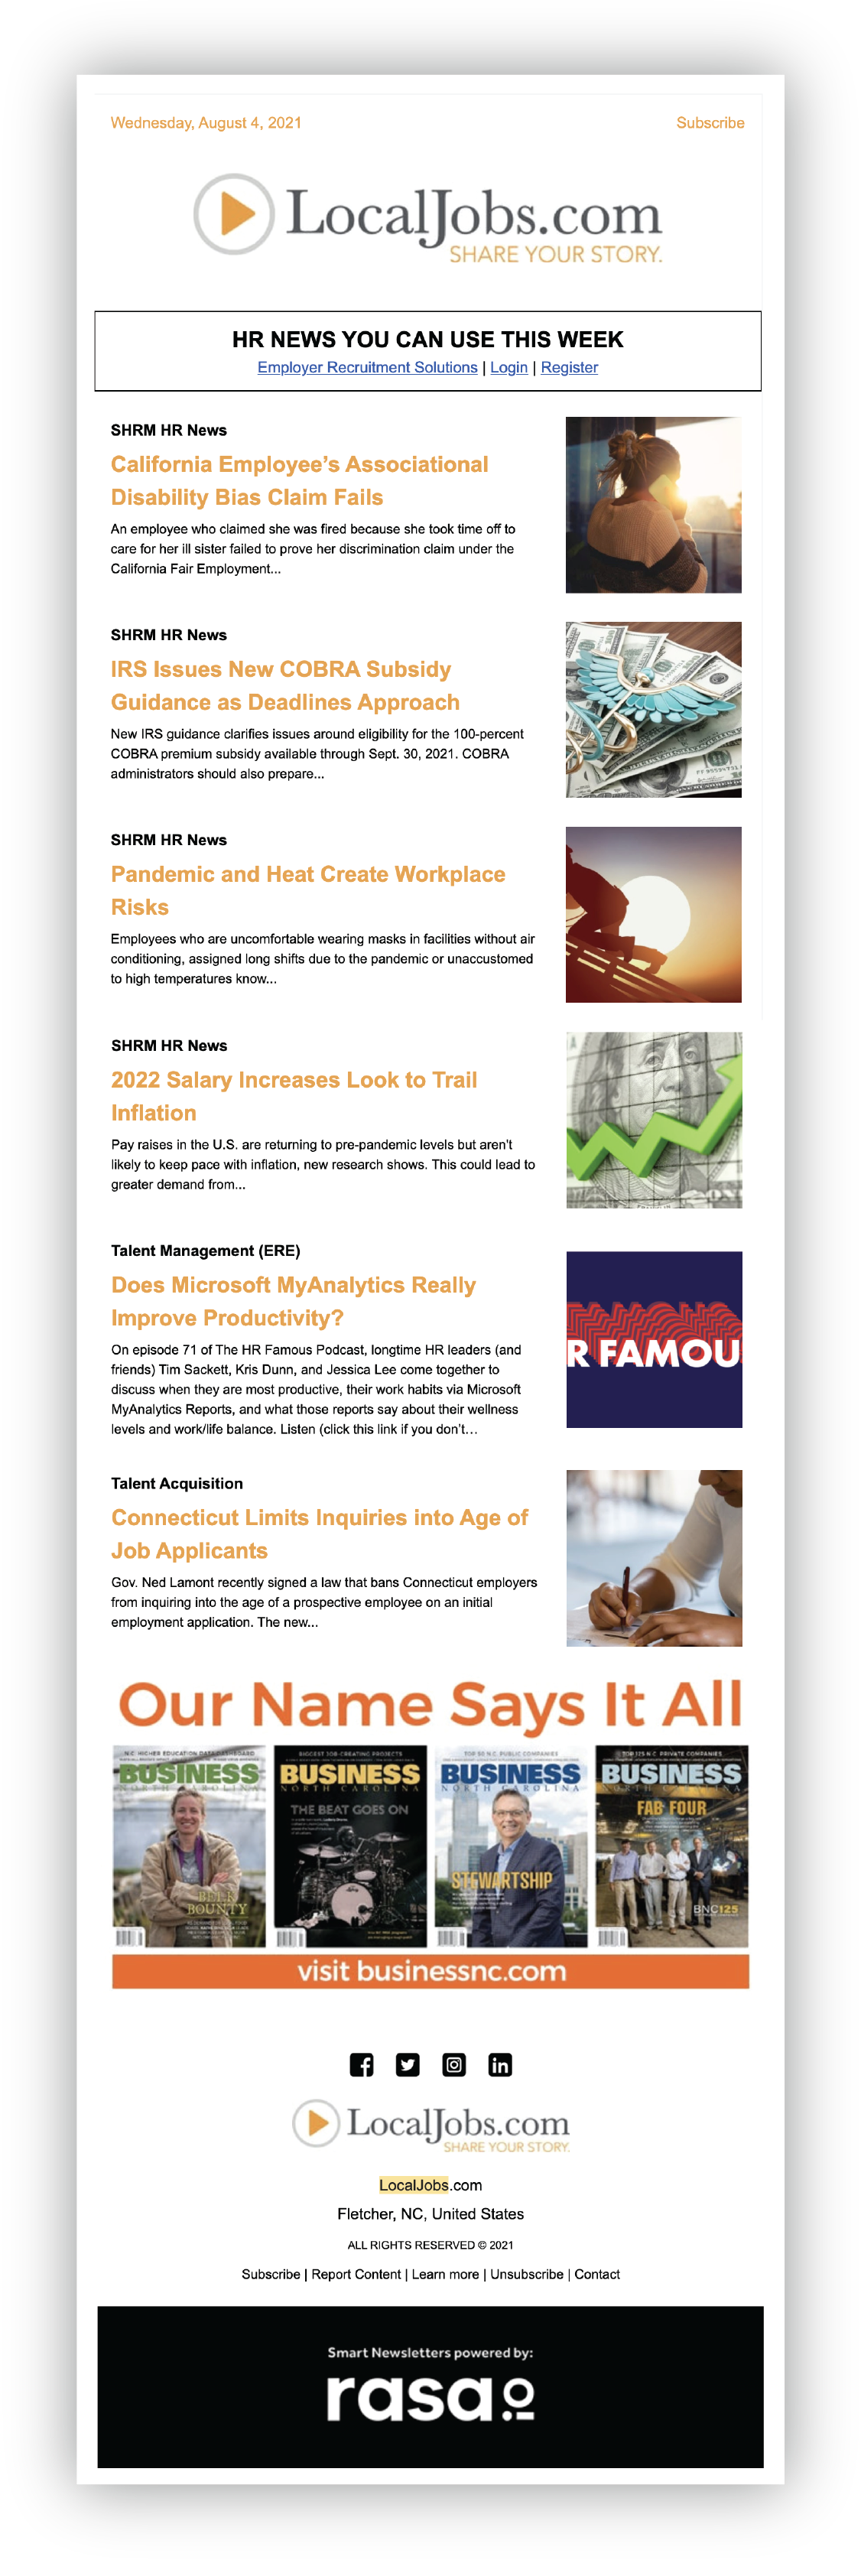 LocalJobs - rasaio - Human Resources and Staffing - Example Newsletter